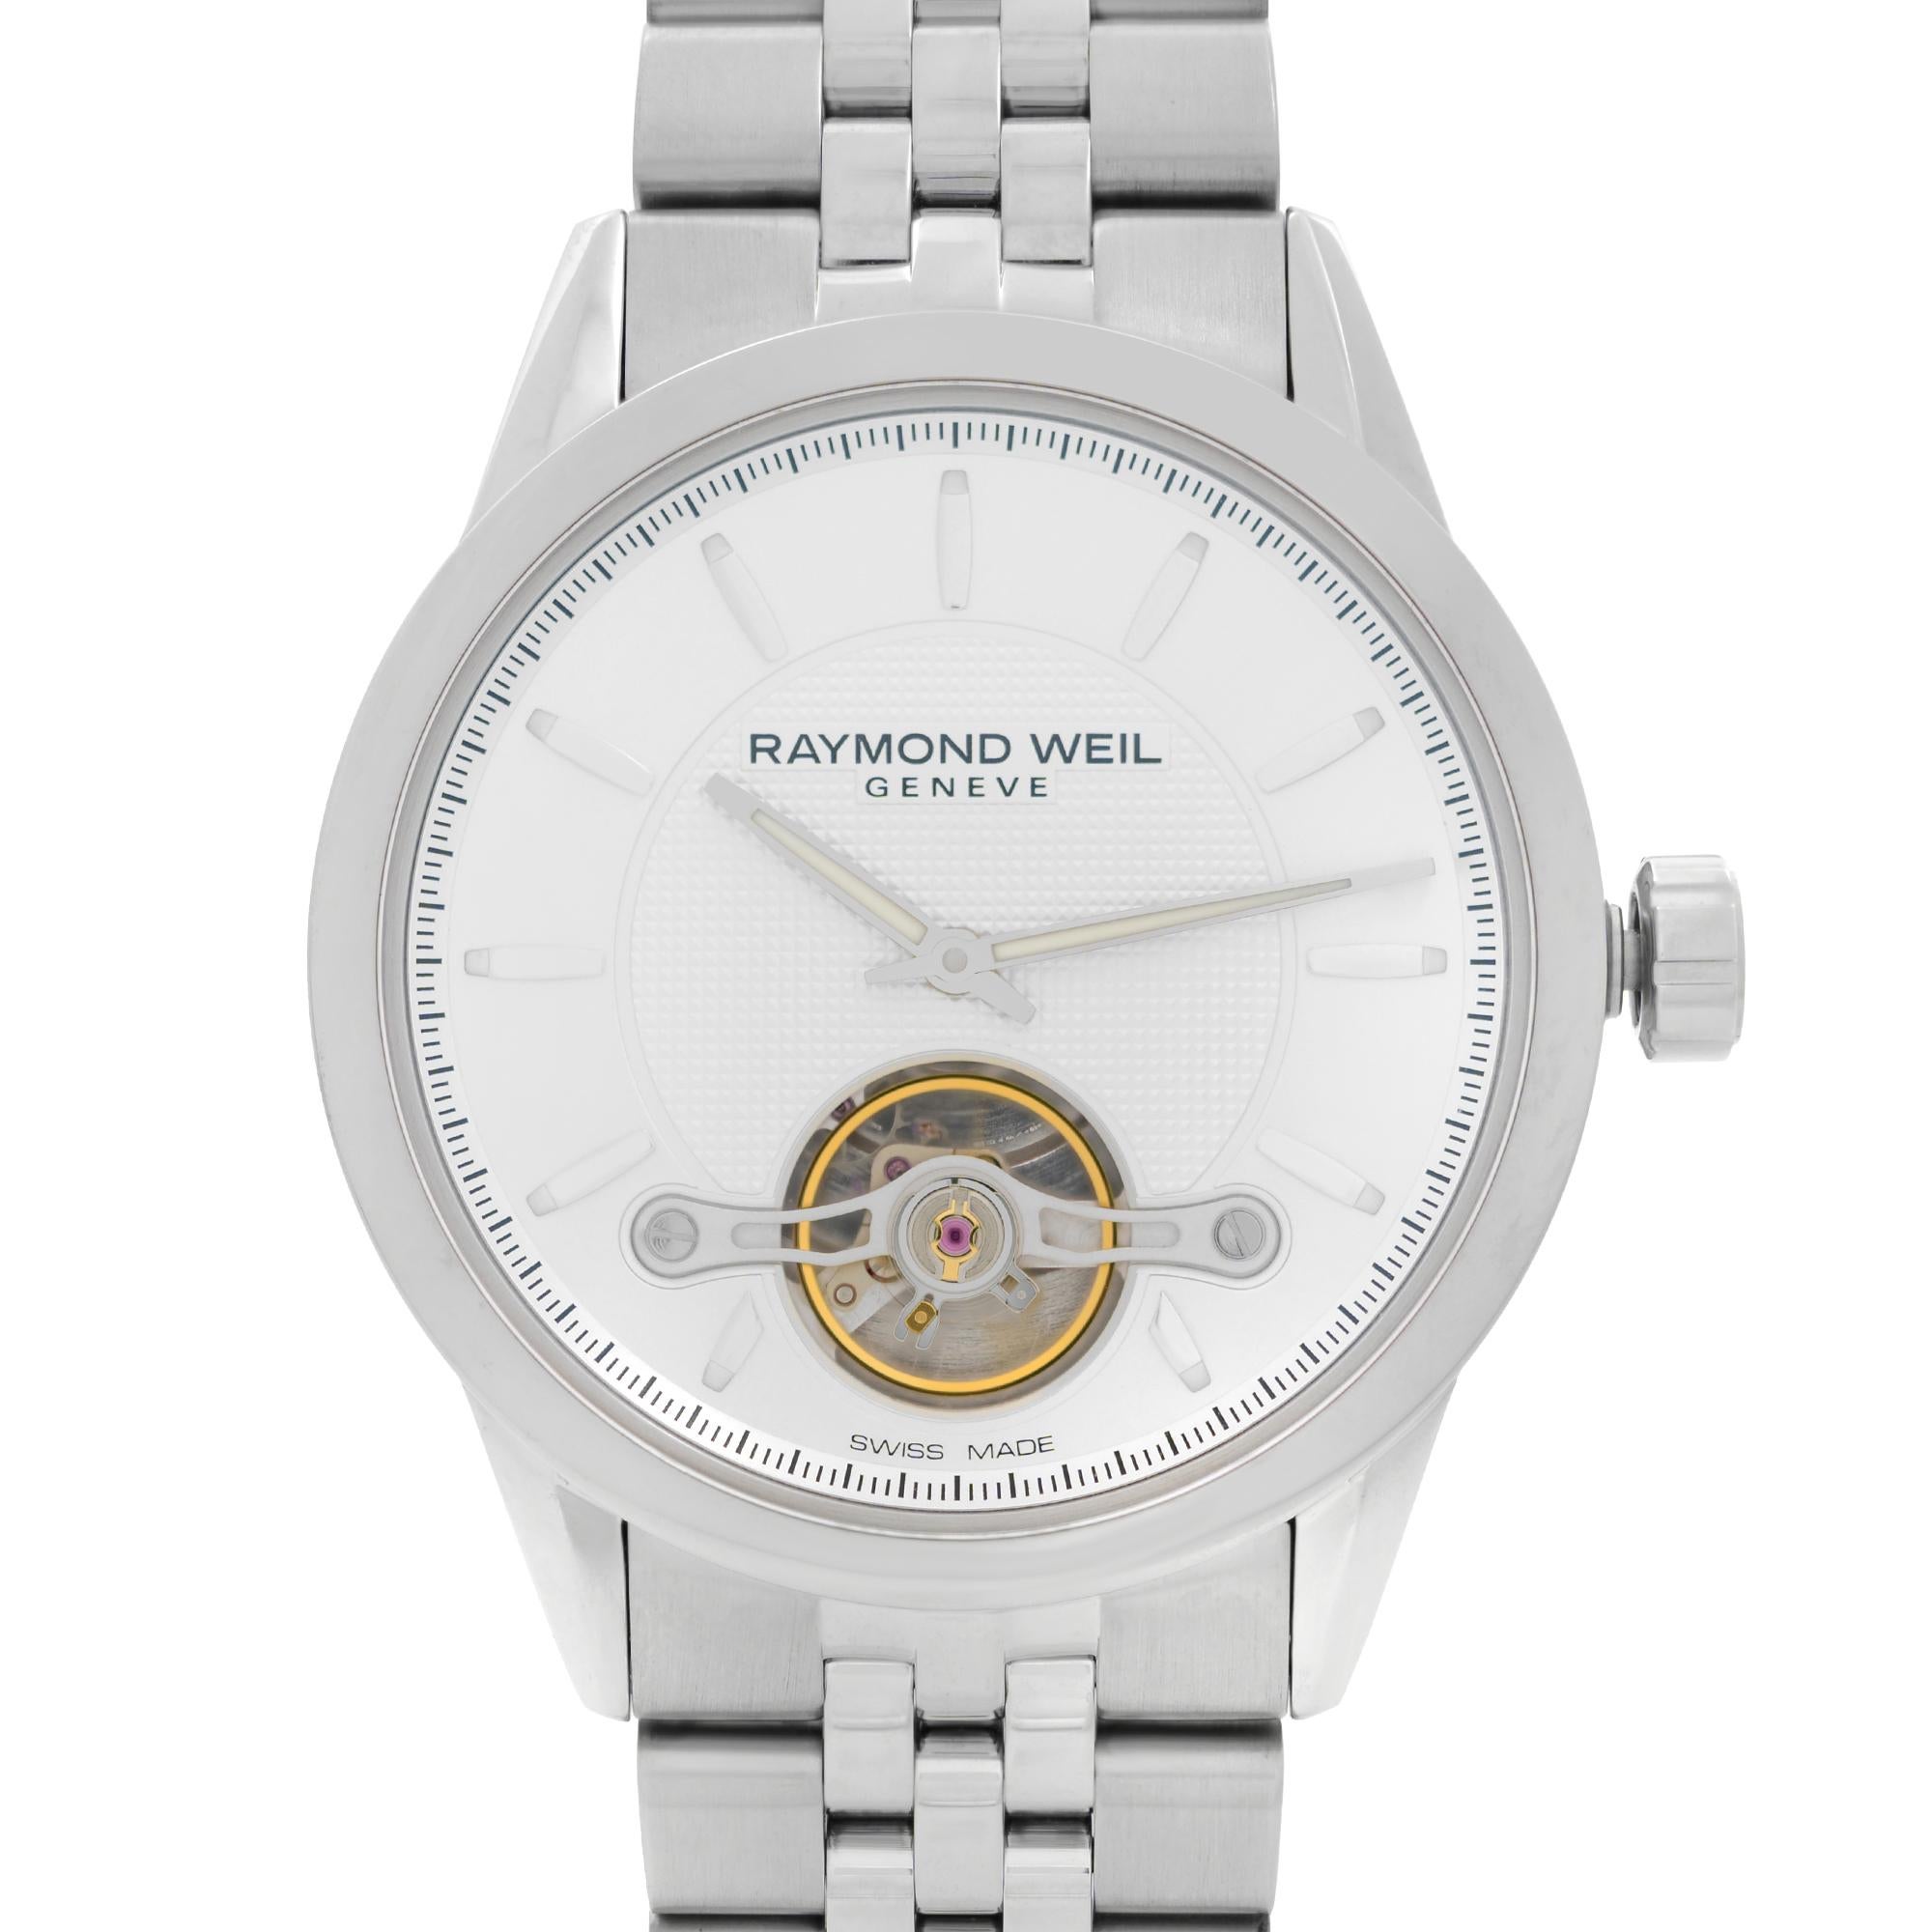 New Raymond Weil Freelancer Steel Silver Dial Automatic Men's Watch 2780-ST-65001. This Beautiful Timepiece Features: Stainless Steel Case and Bracelet, Fixed Stainless Steel Bezel, Silver (Open Balance Wheel Display) Dial with Silver-Tone Hands and